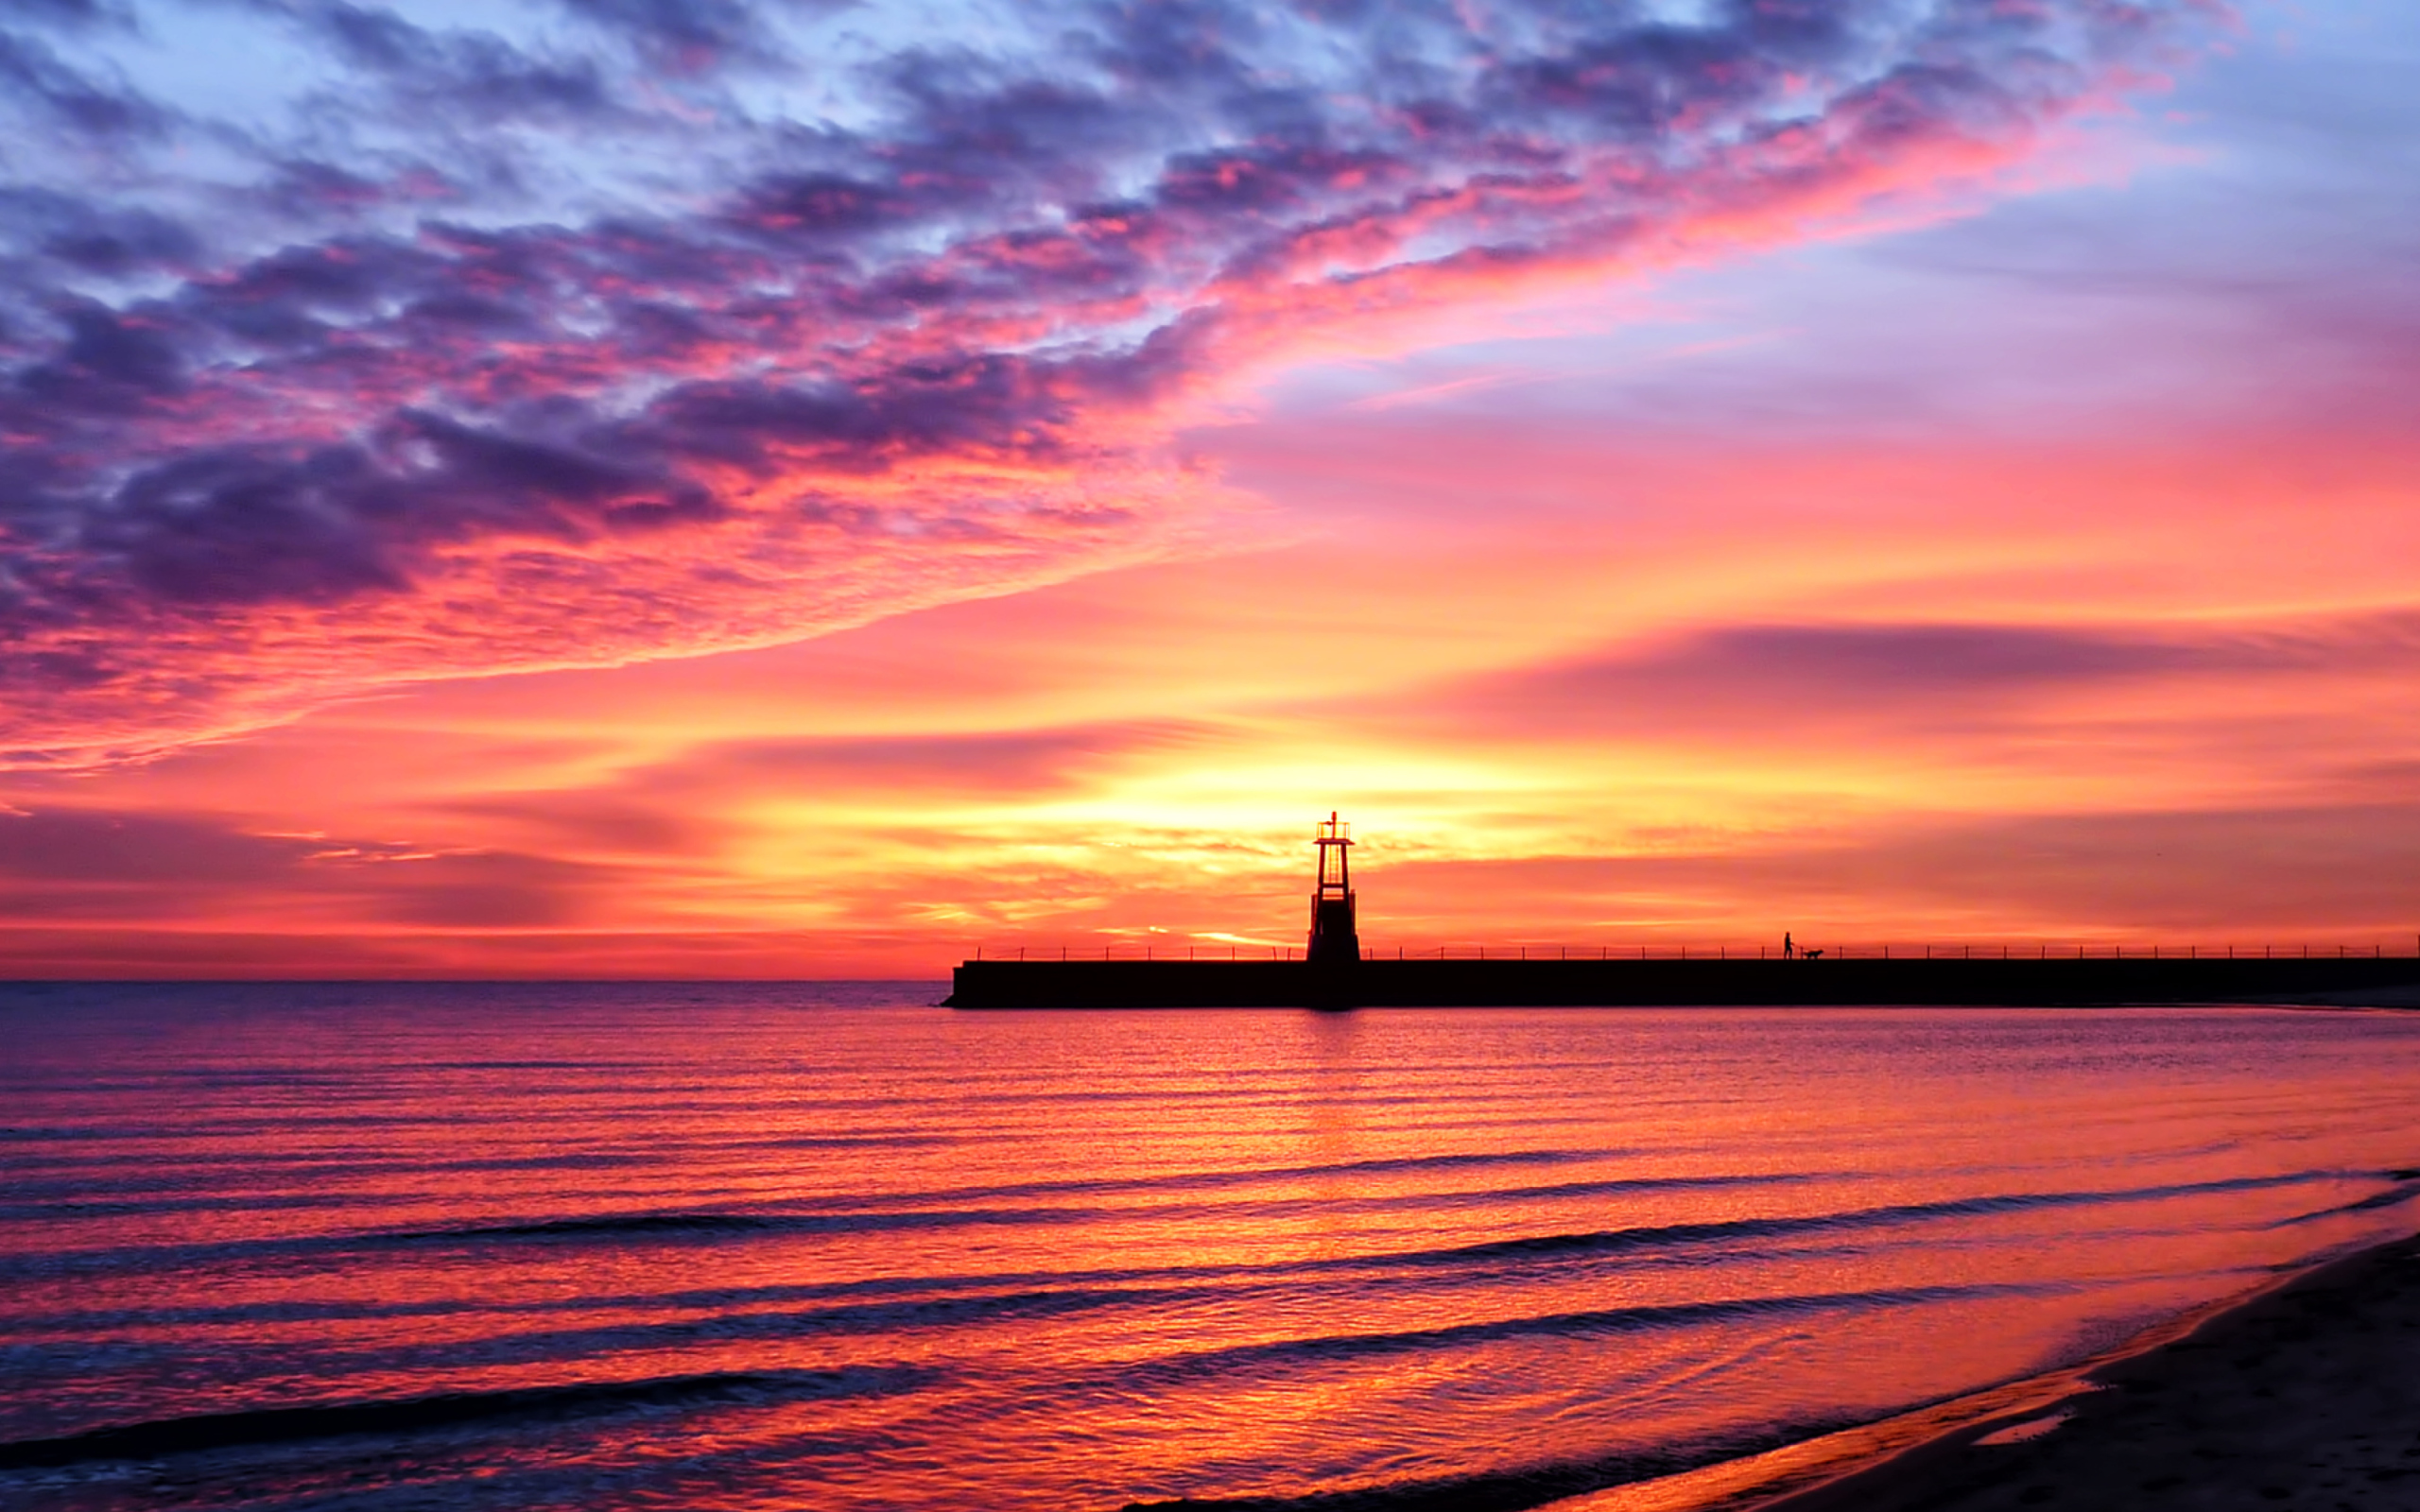 Lighthouse And Red Sunset Beach wallpaper 2560x1600